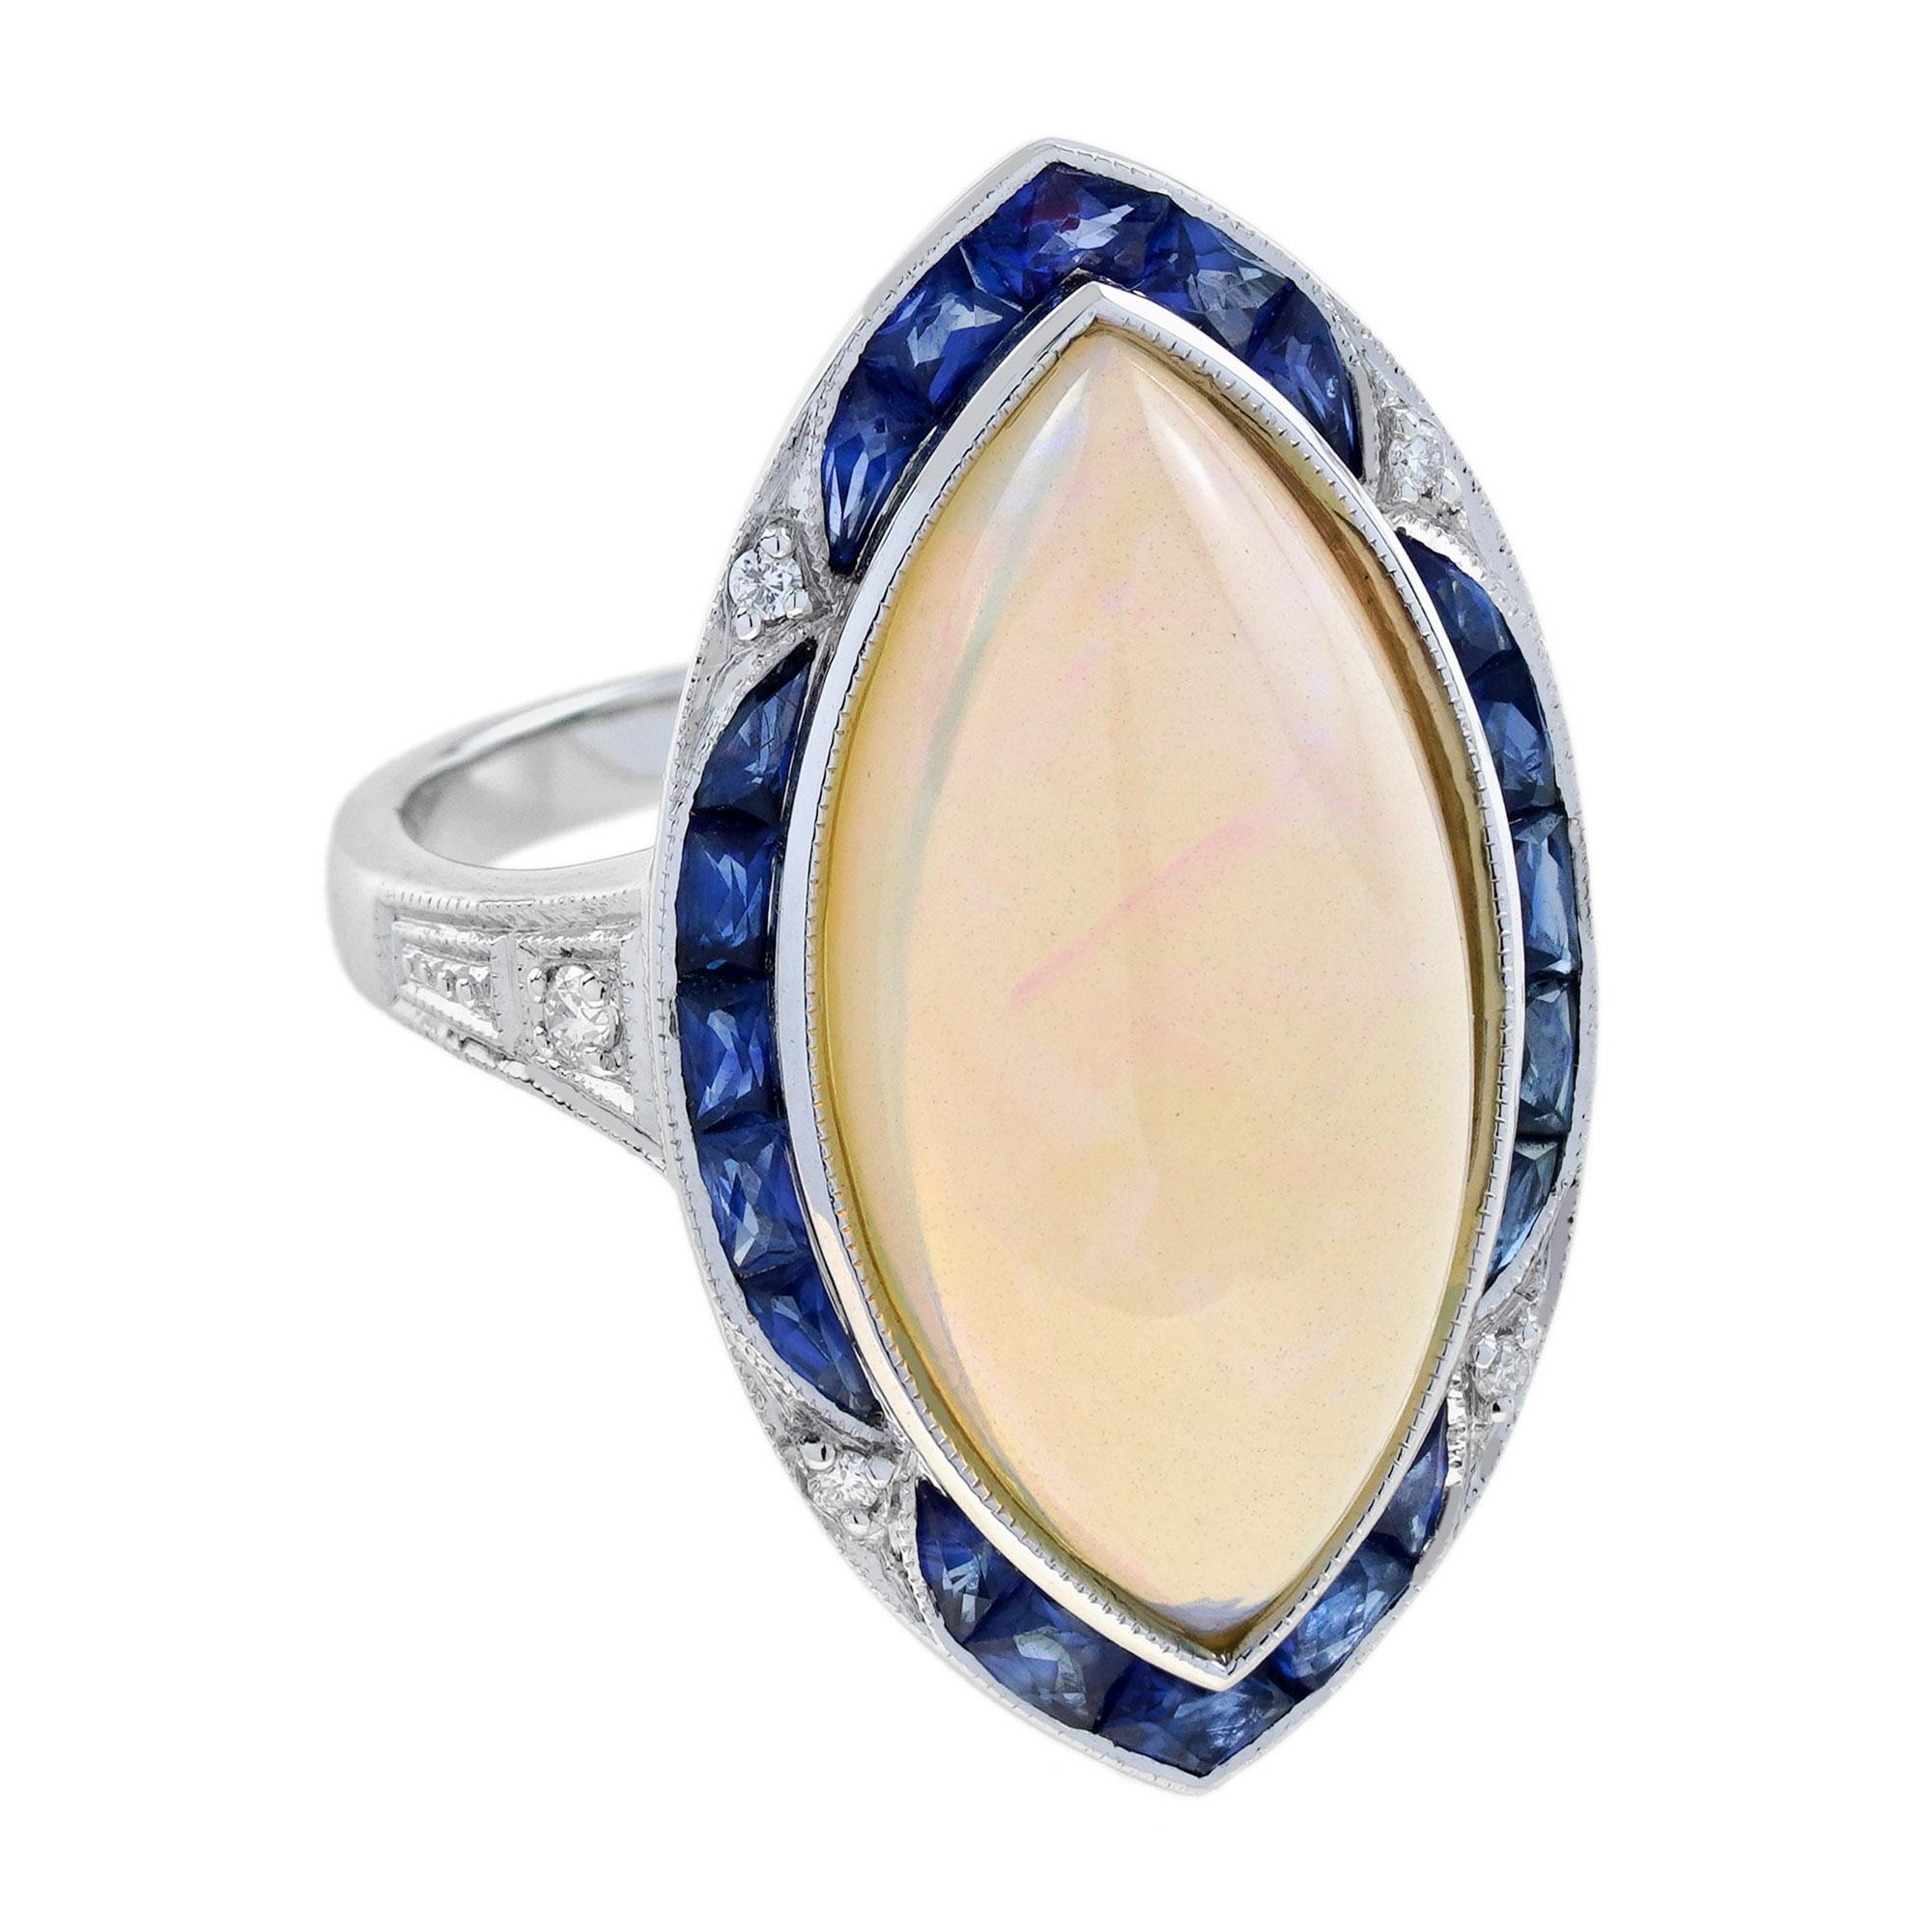 Women's 6.55 Ct. Opal Blue Sapphire Diamond Art Deco Style Cocktail Ring in 18K Gold